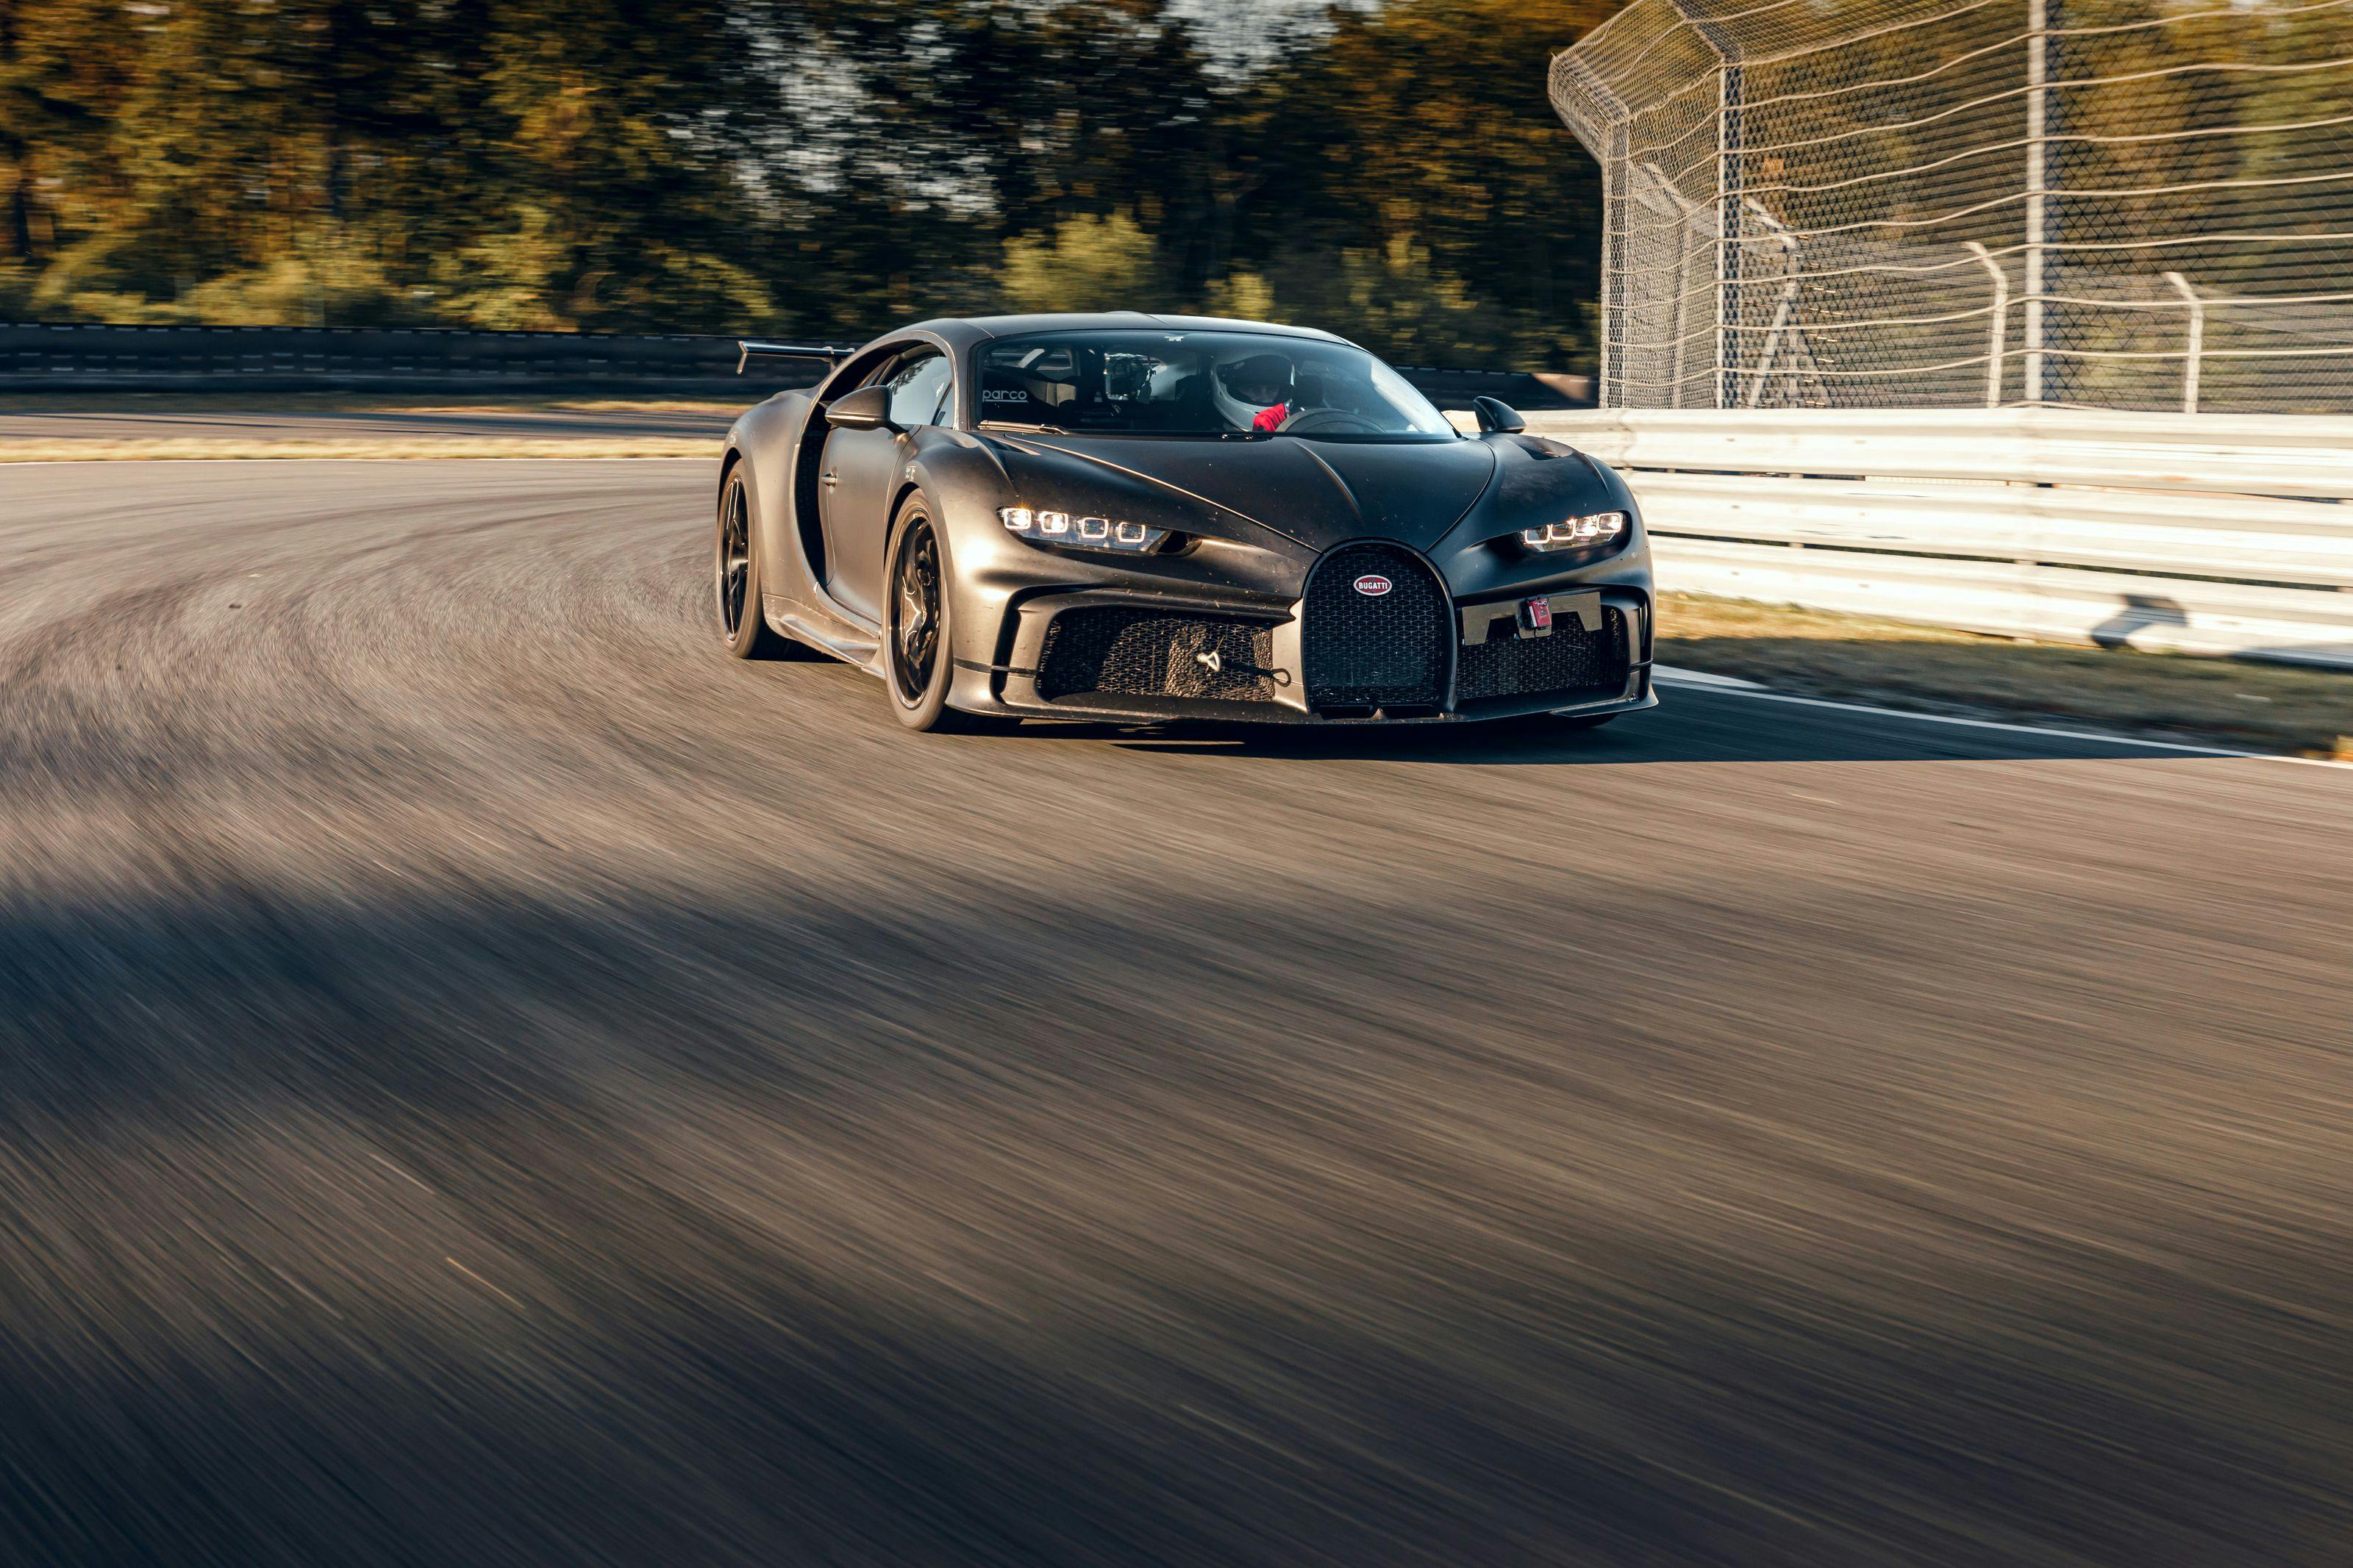 Fine-tuning the Chiron Pur Sport on the test track